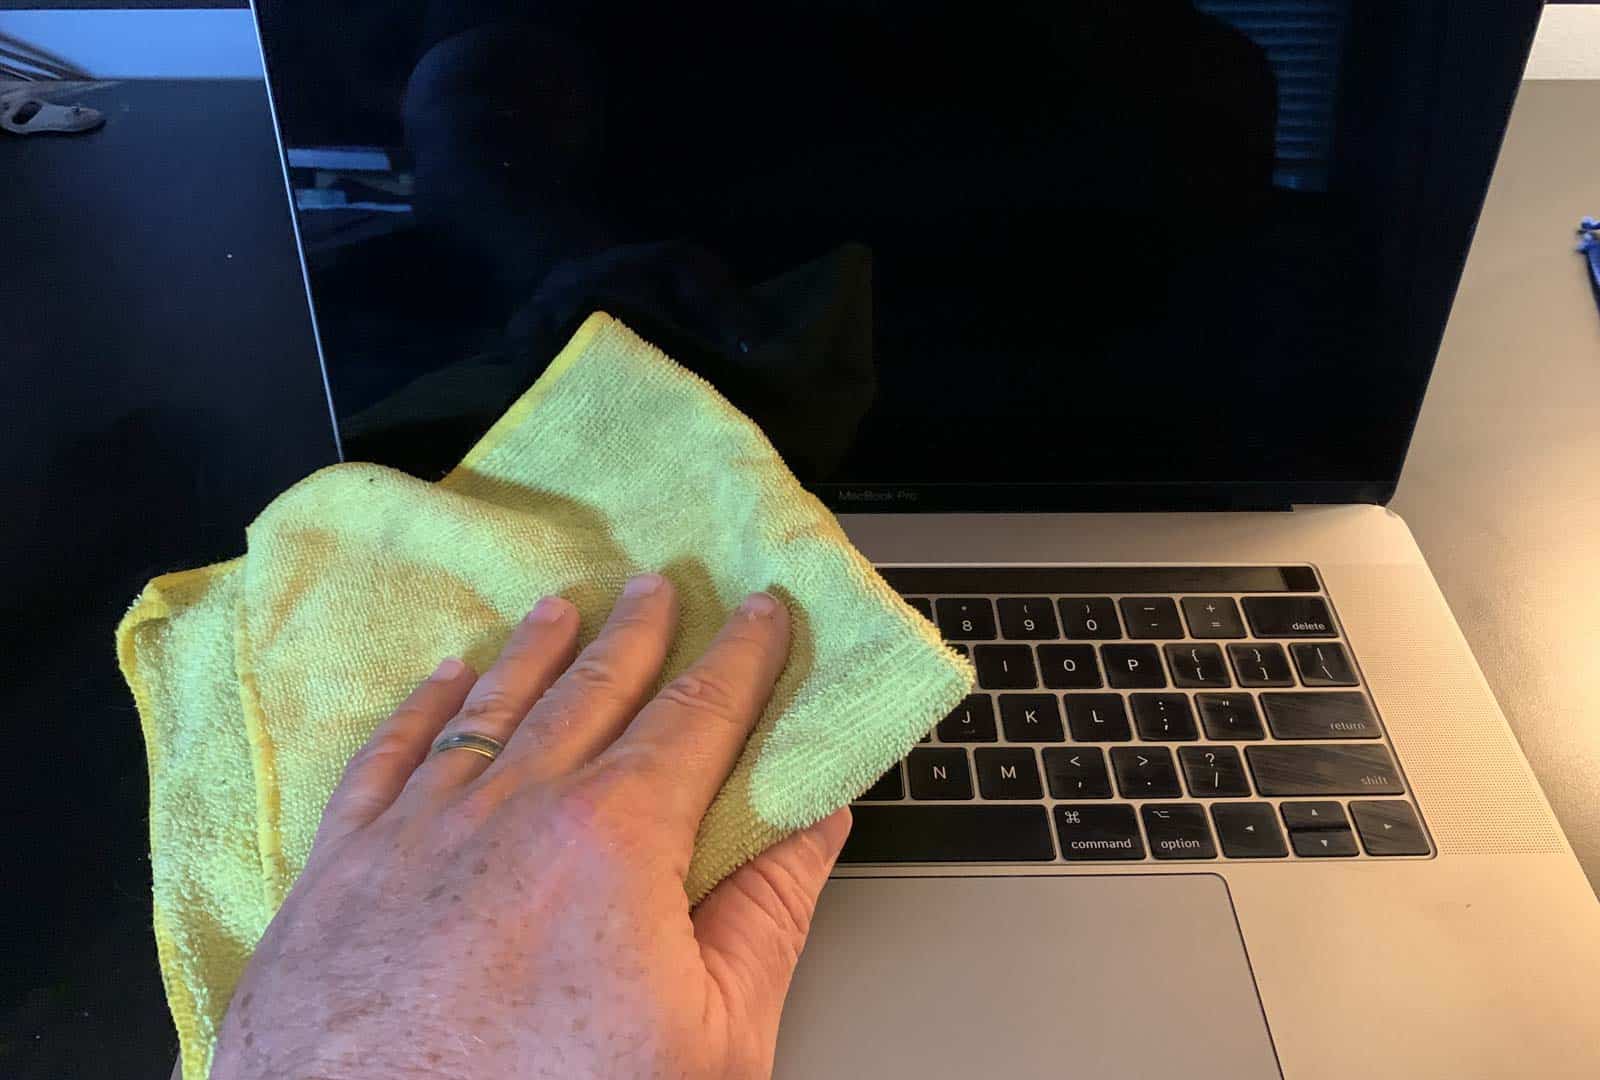 Use a clean, dry, lint-free microfiber cloth to dry everything off